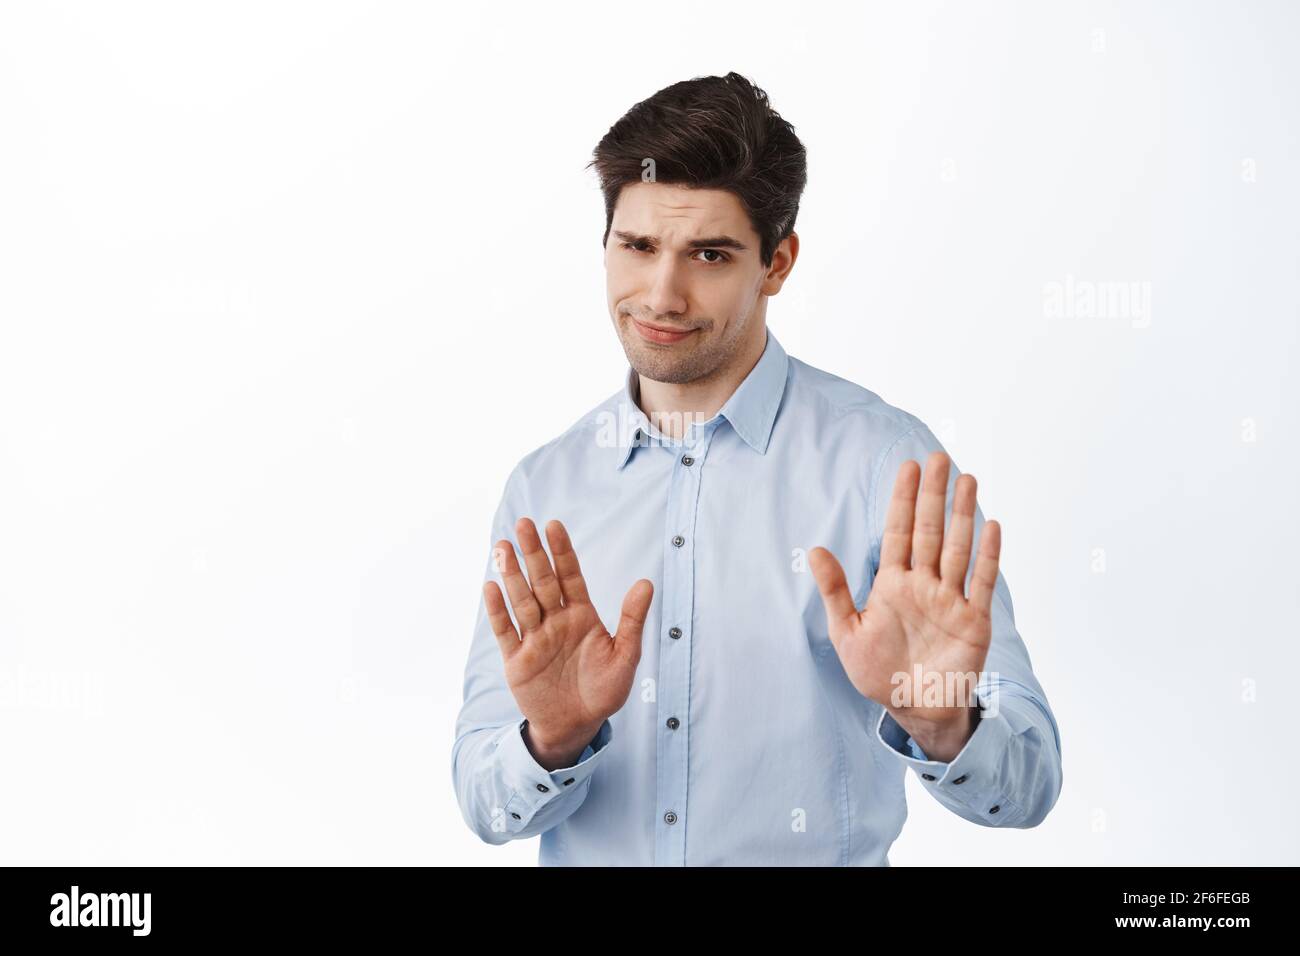 Slow down, stop, stay away, keep social distance. Skeptical boss, male entrepreneur showing refuse, reject block gesture, telling to quit, standing Stock Photo